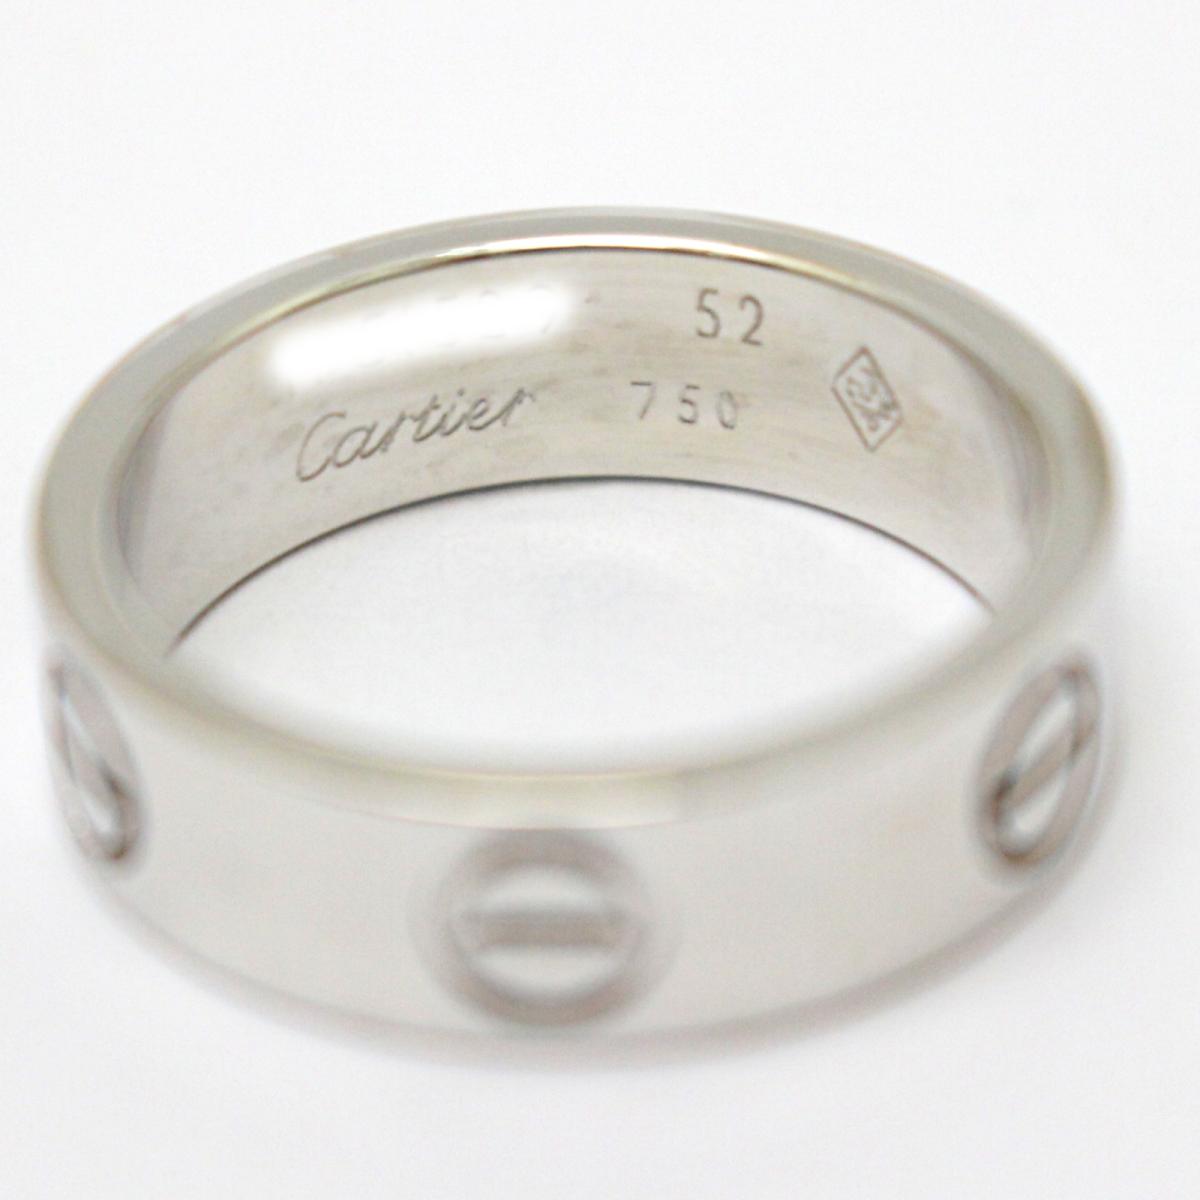 Auth Cartier Love Ring #52 18KWG (750 